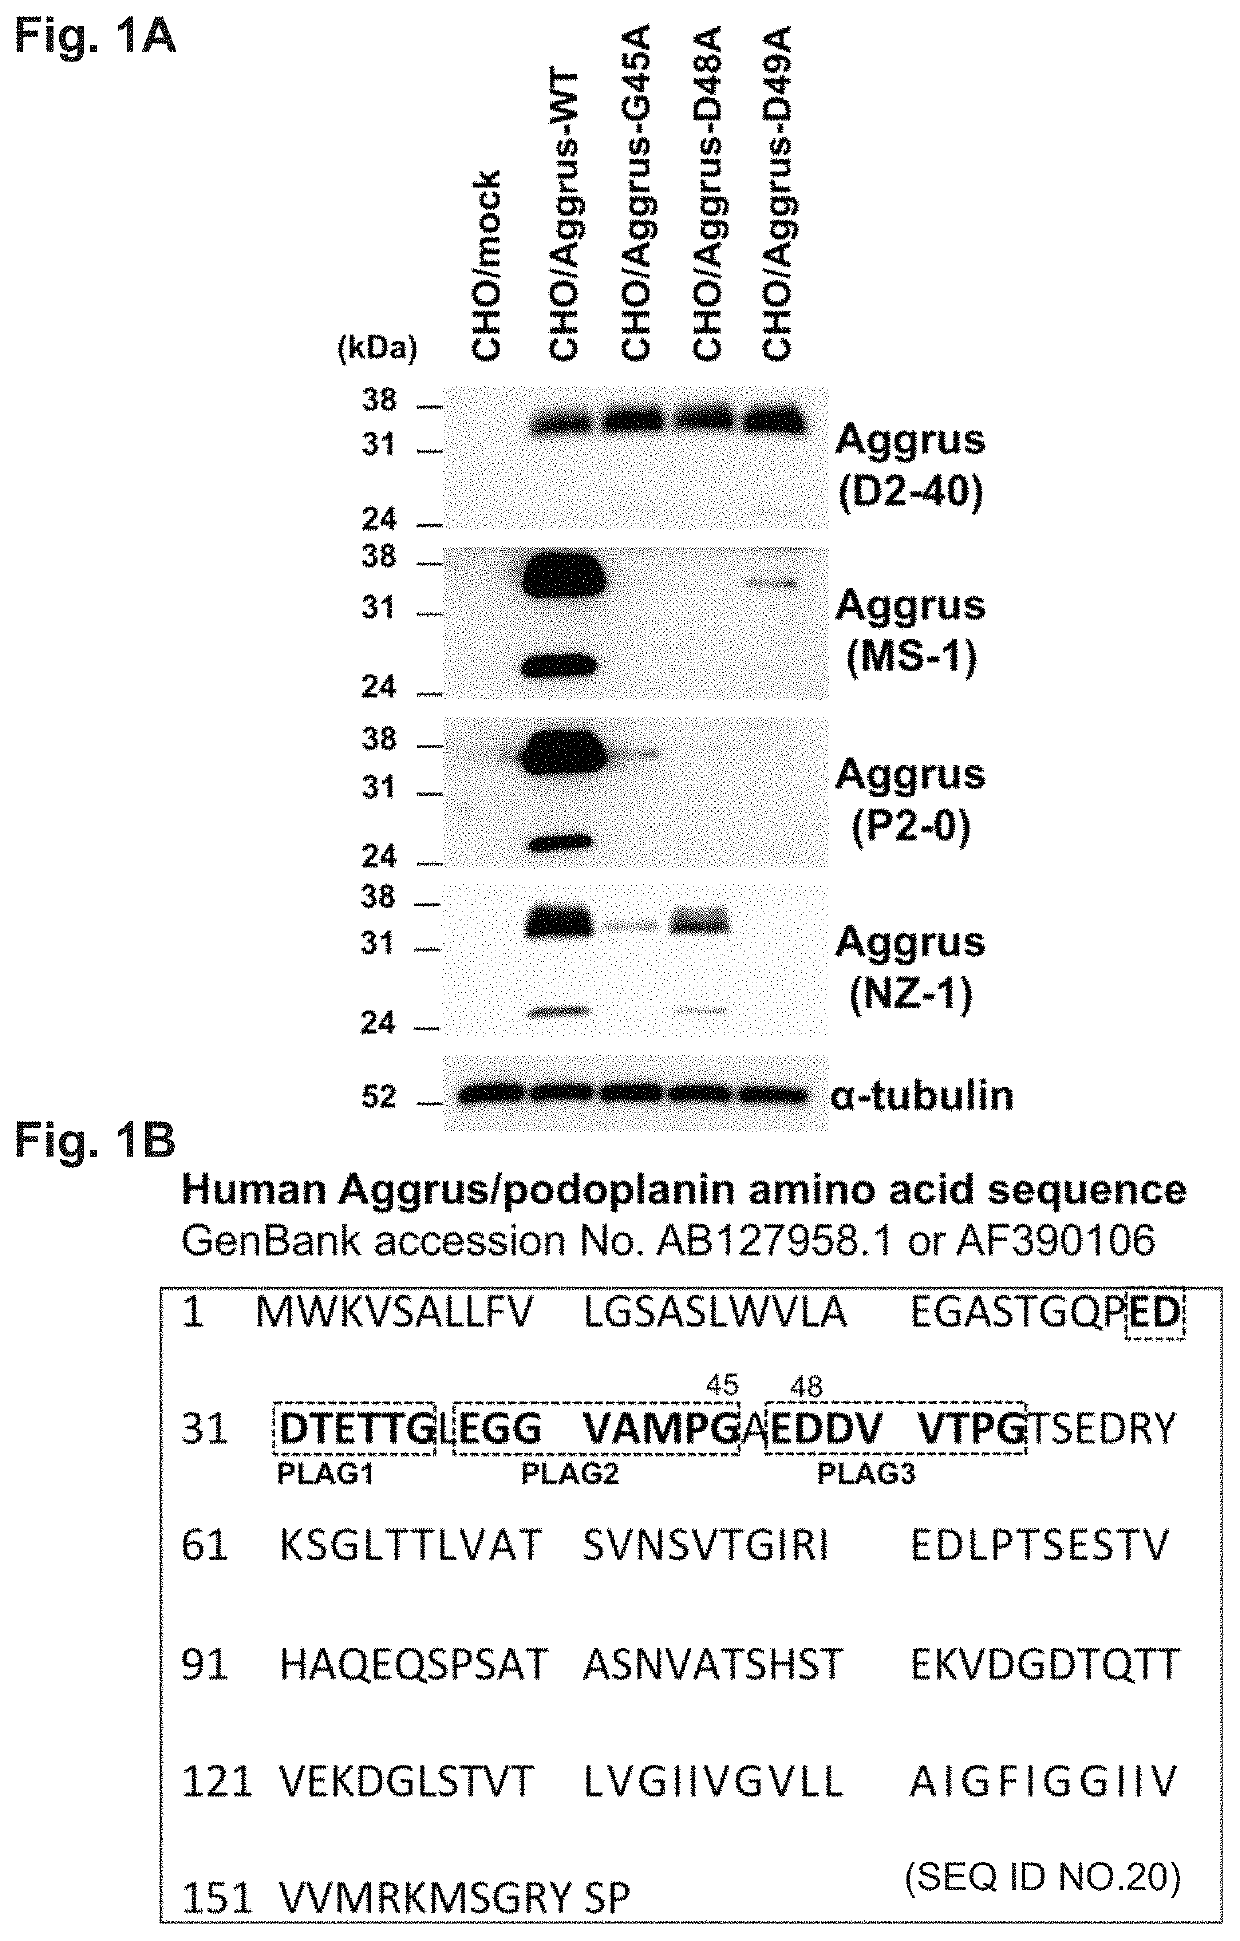 Anti-Aggrus monoclonal antibody, domain in Aggrus which is required for binding to CLEC-2, and method for screening for Aggrus-CLEC-2 binding inhibitor